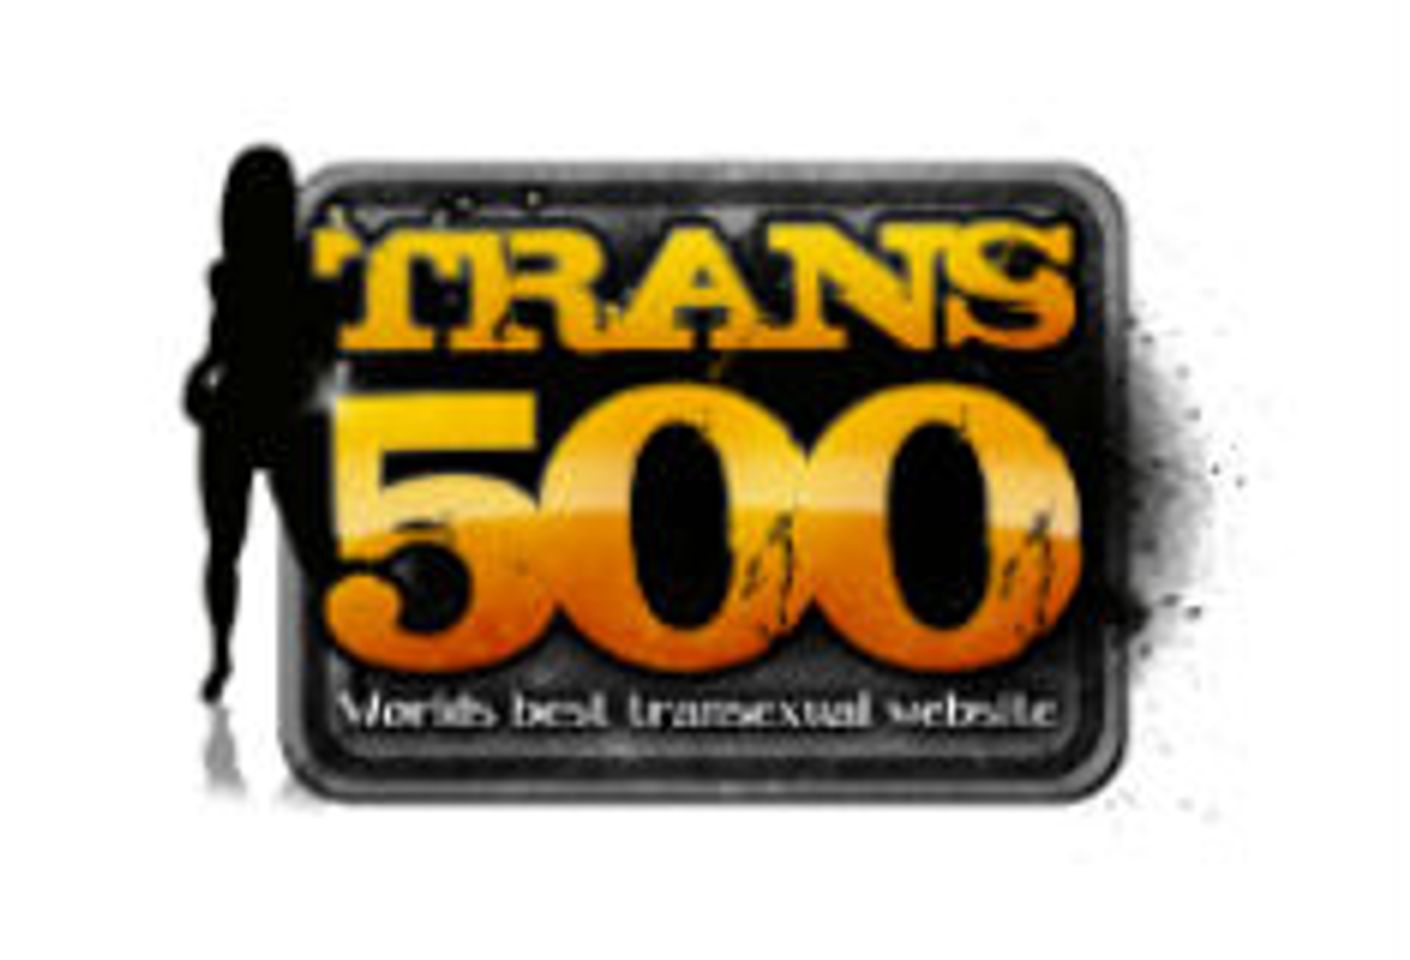 Pure Play Media and Trans500 Street 'Transsexual Sexcapades 2' Today